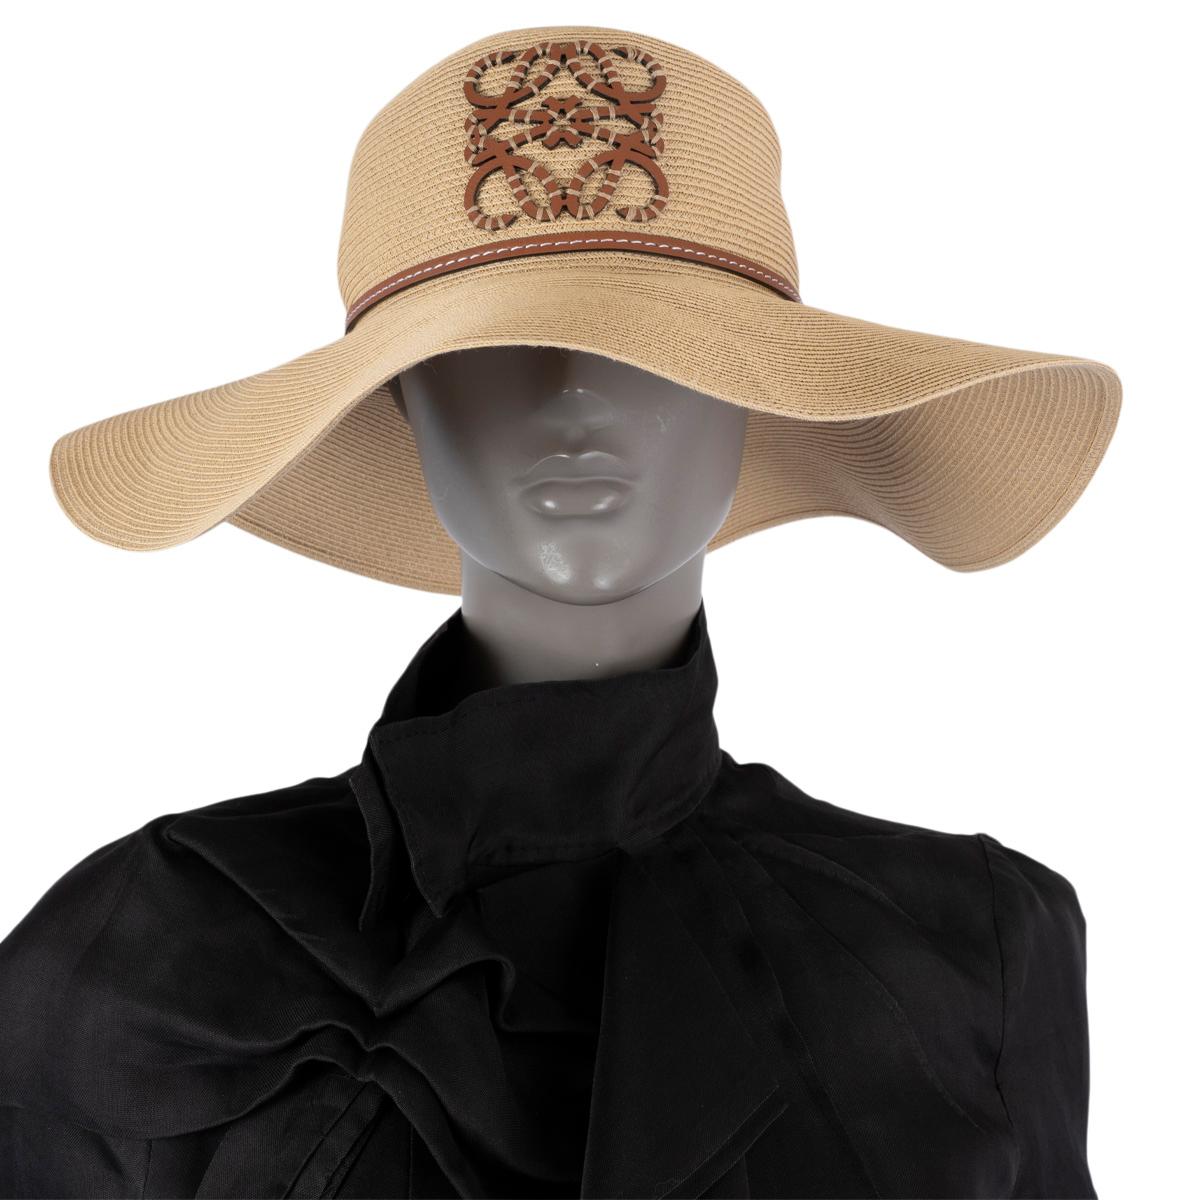 100% authentic Loewe x Paula's Ibiza capeline straw hat in natural paper (100%). Featuring a tan leather Anagram logo and band.Has been worn and is in excellent condition.

Measurements
Tag Size	59
Inside Circumference	59cm (23in)

All our listings